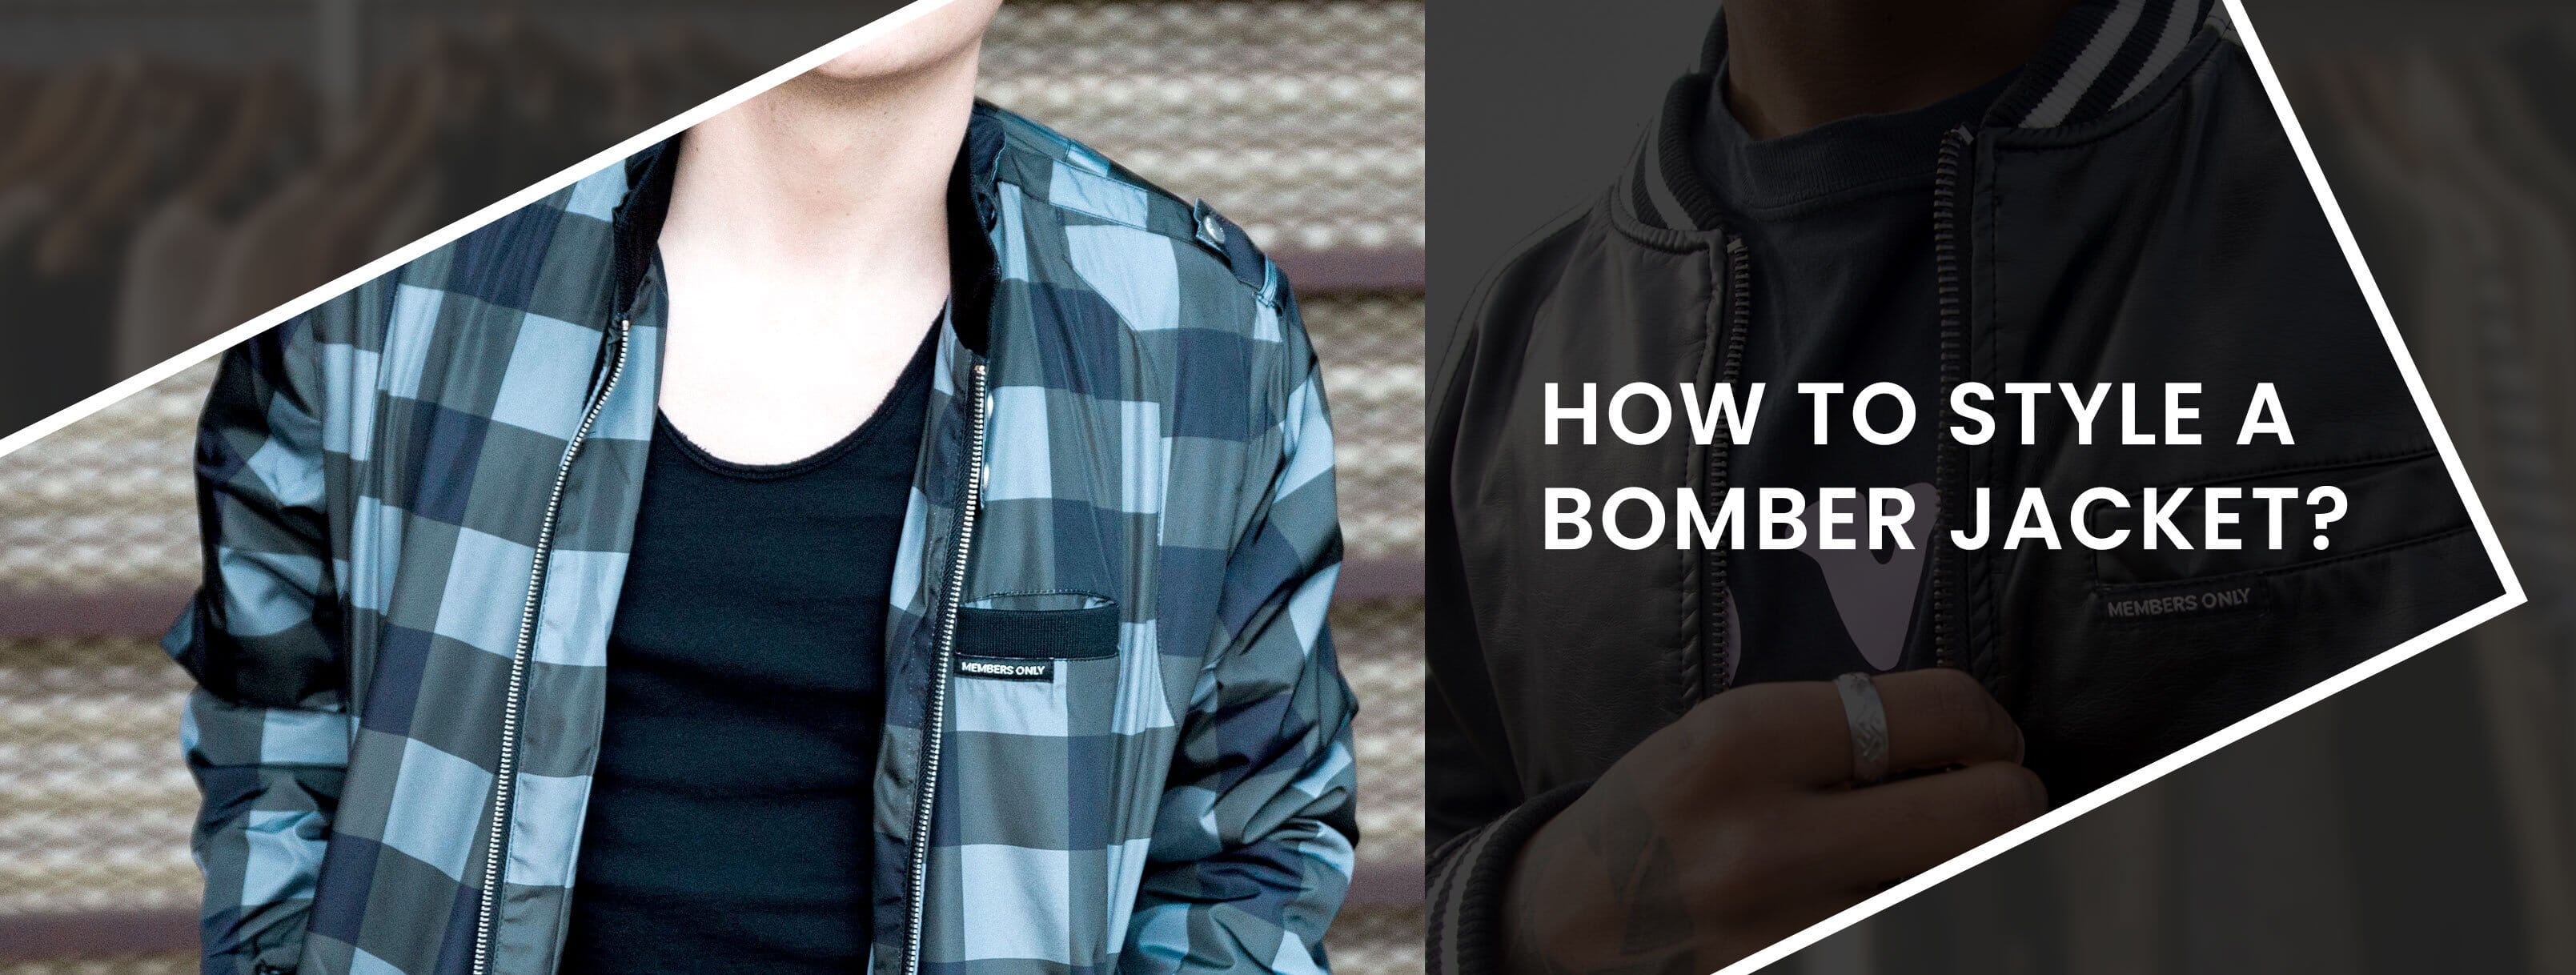 How to style a bomber jacket?